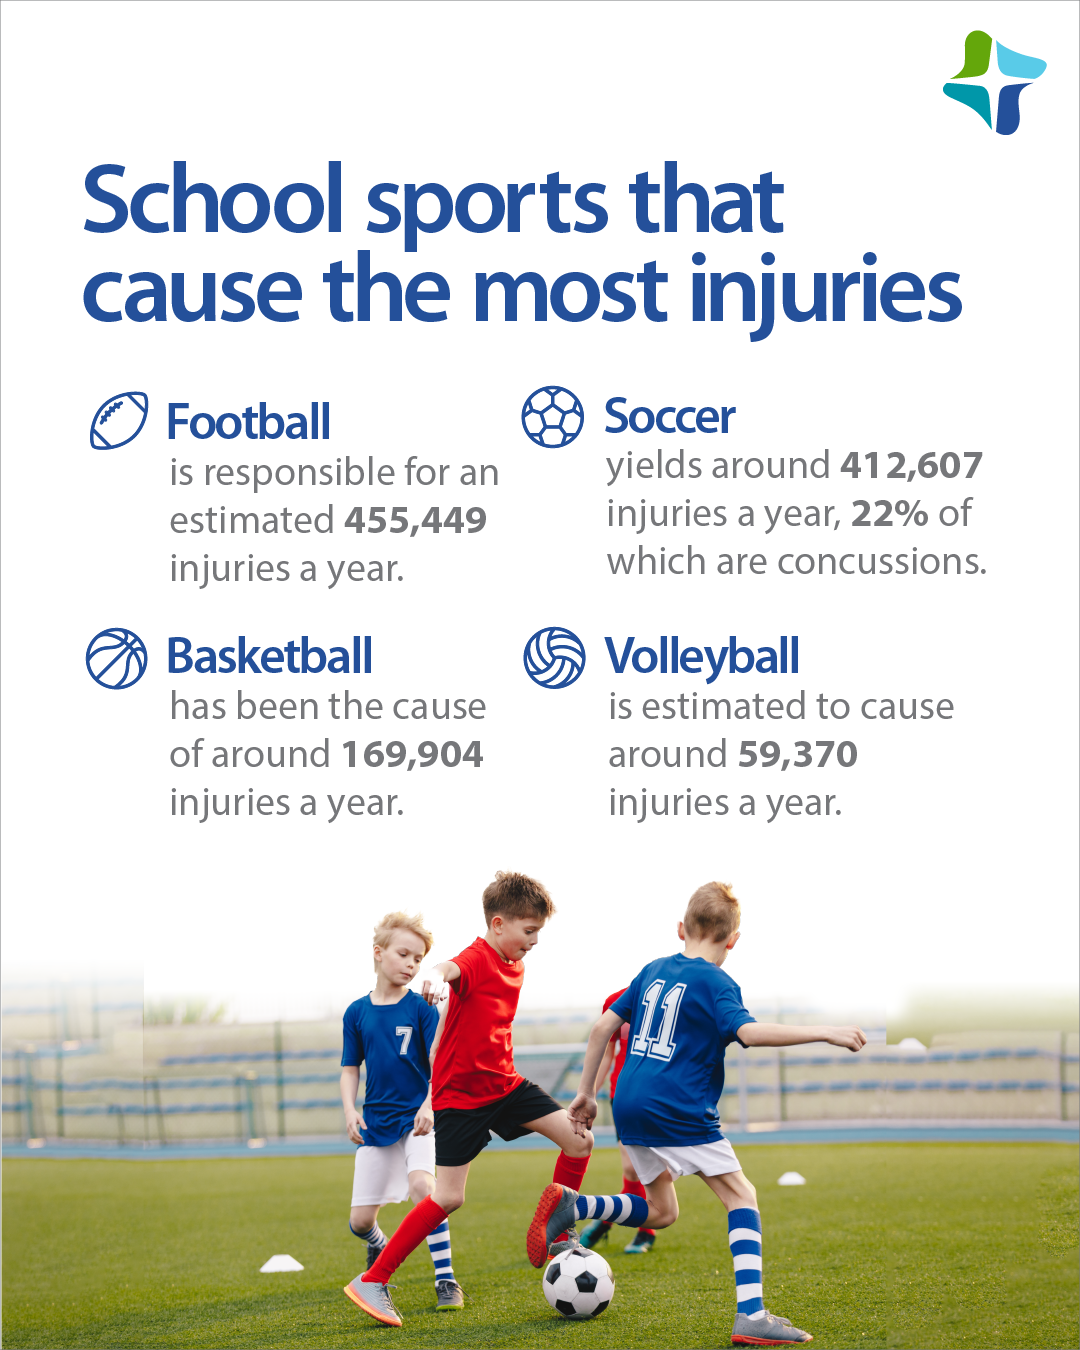 Which school sports the most injuries?